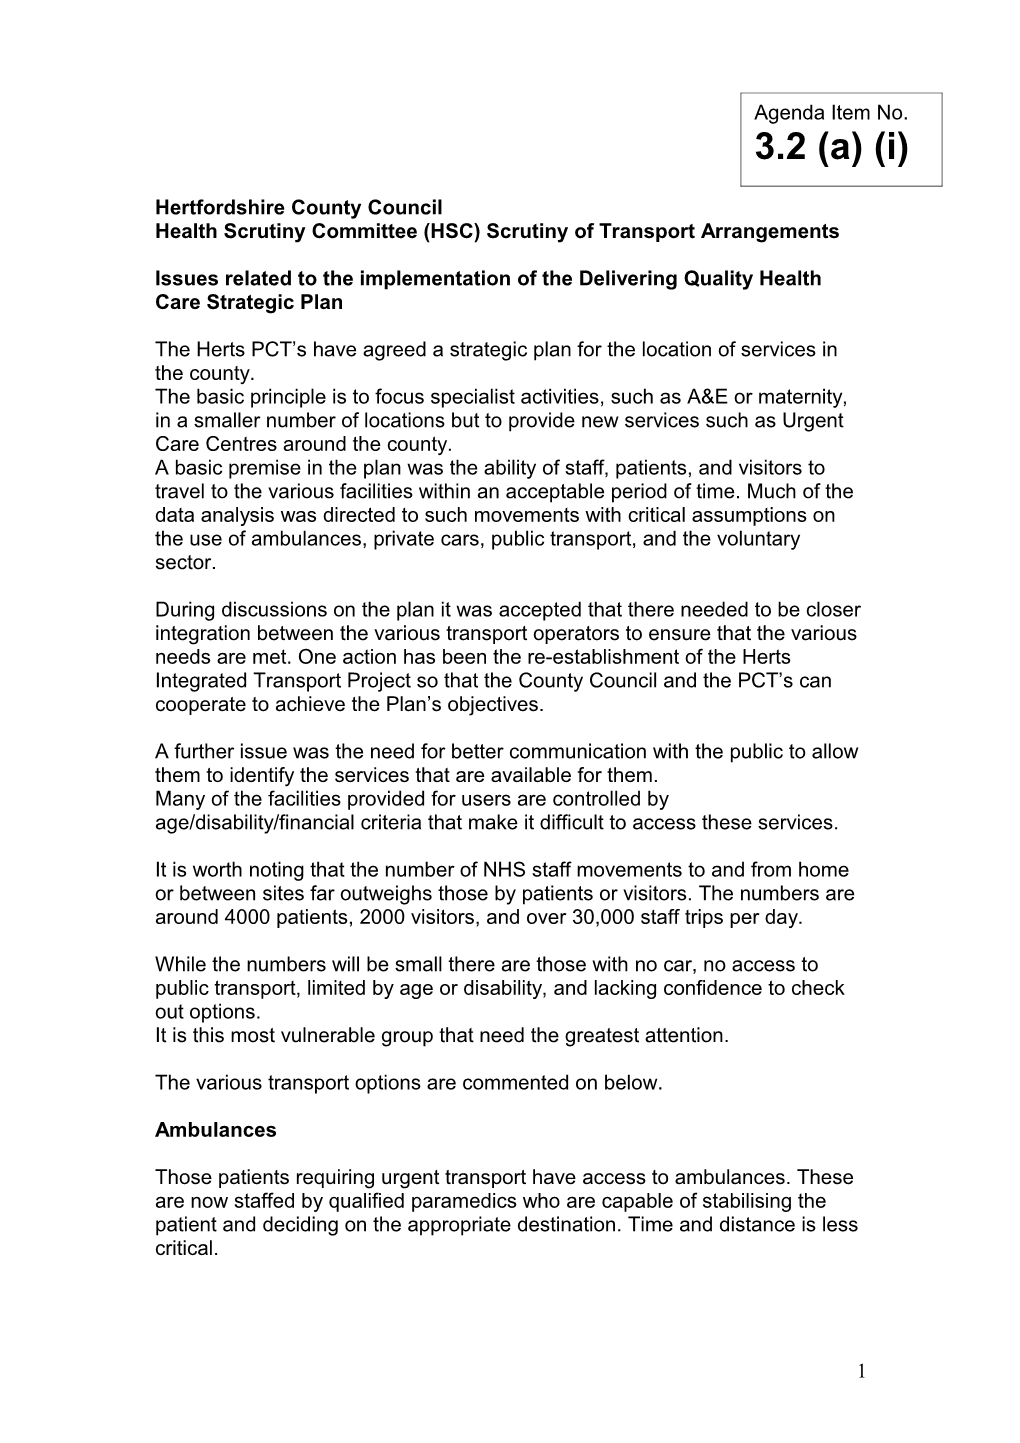 Implementing Delivering Quality Health Care in Herts Topic Group Transport Submission